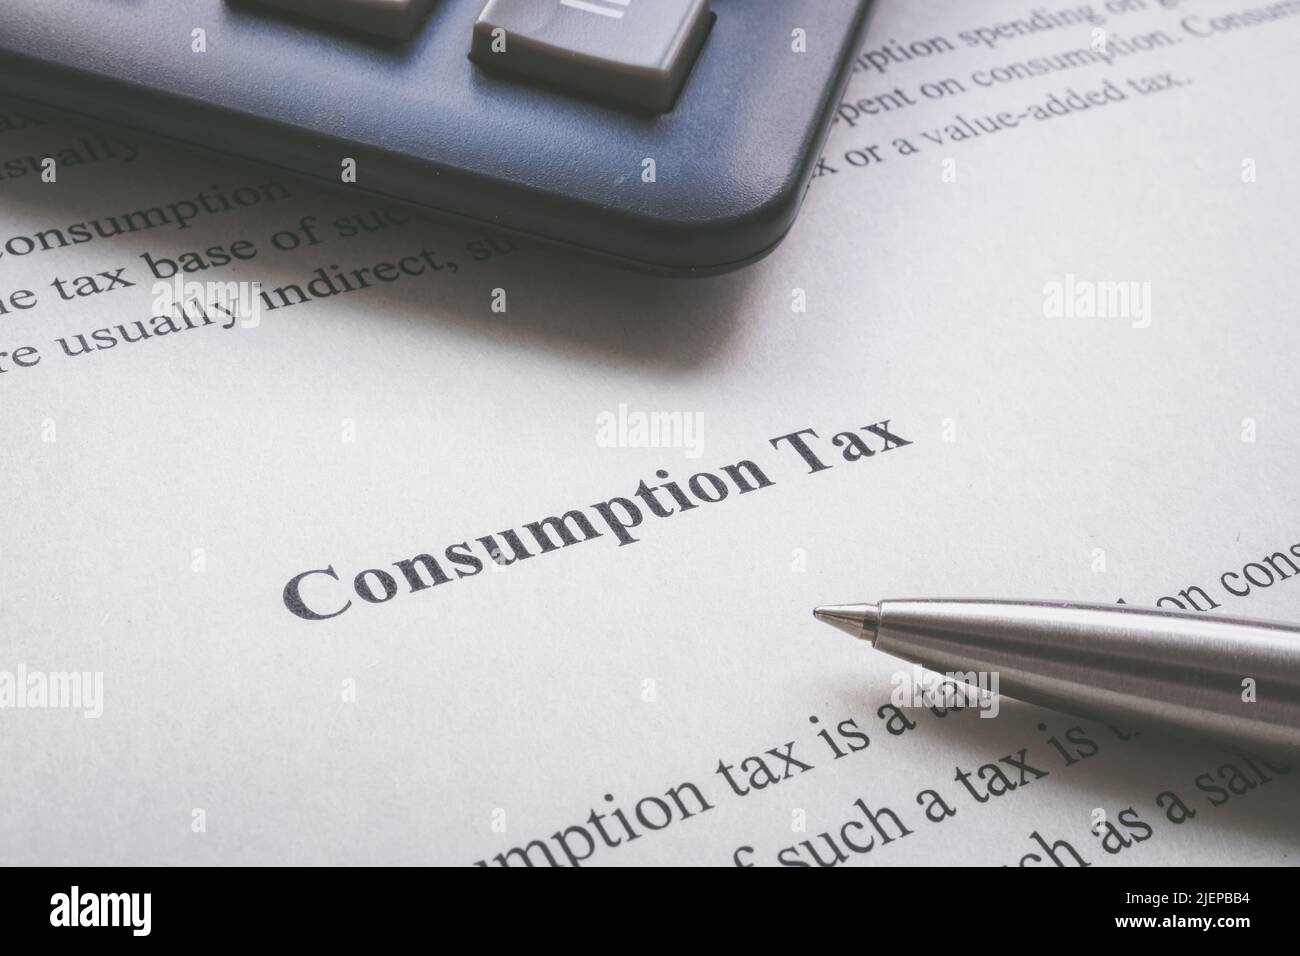 Info about consumption tax and a pen. Stock Photo